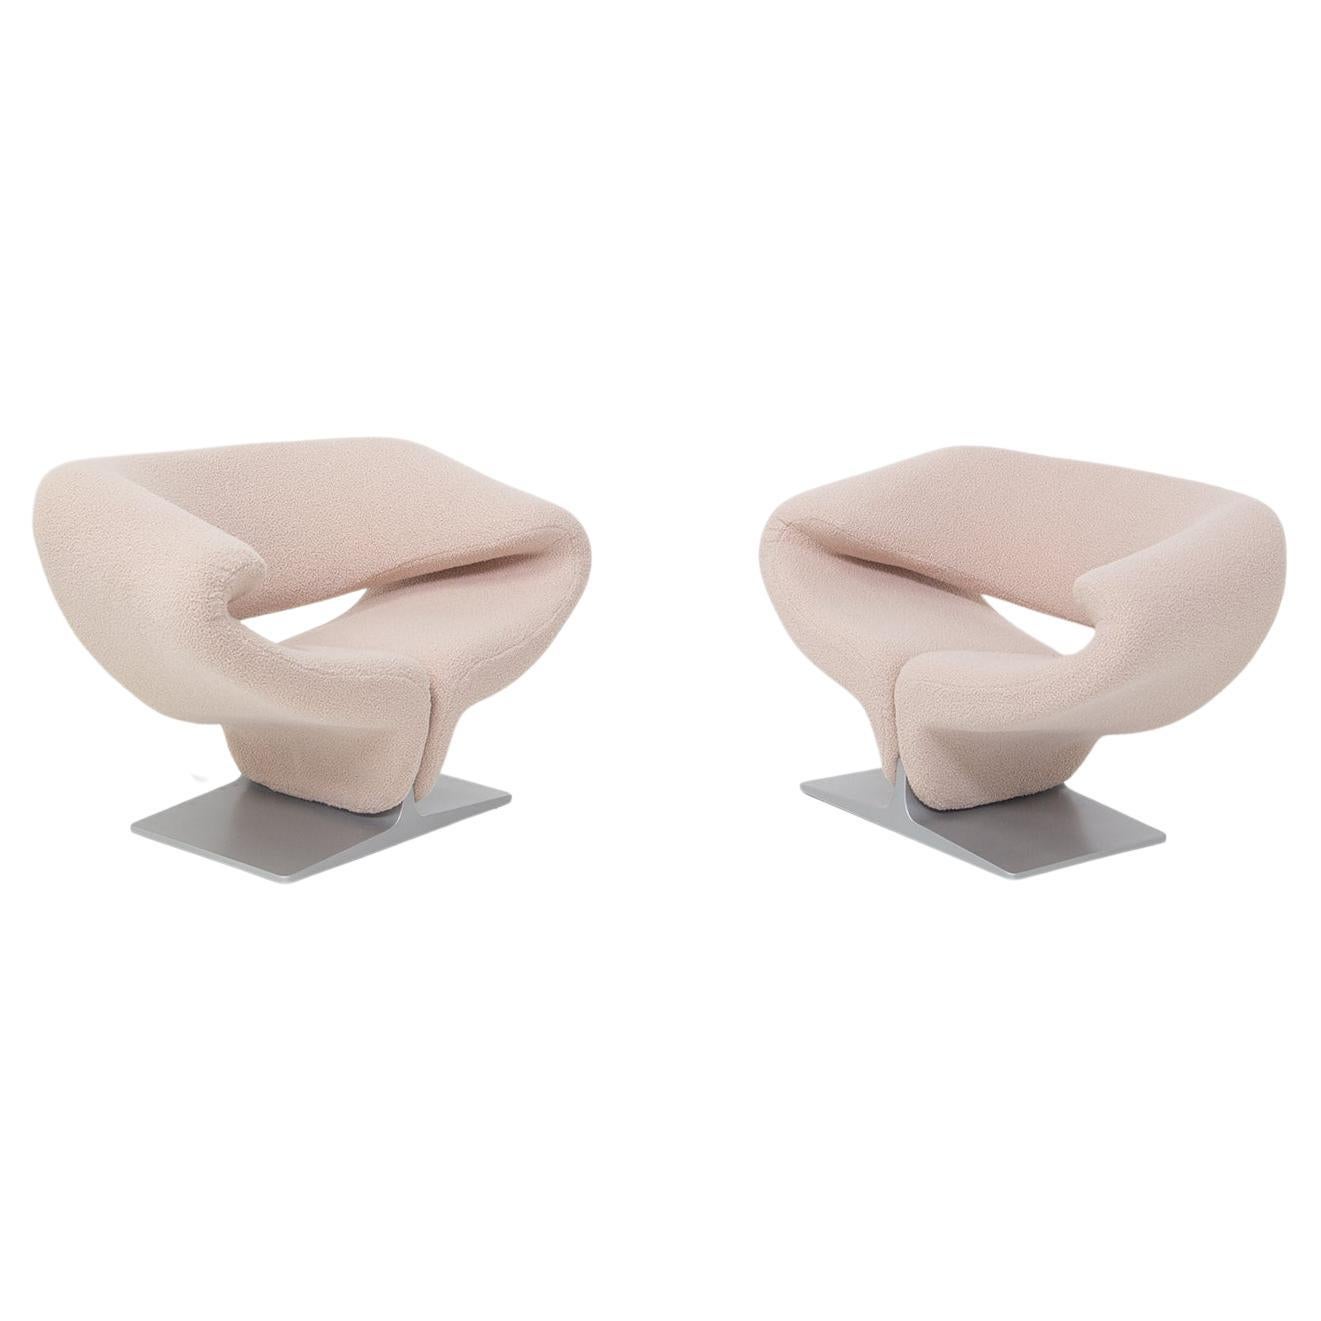 Pierre Paulin Ribbon Armchairs for Artifort in Pink Bouclè, First Edition